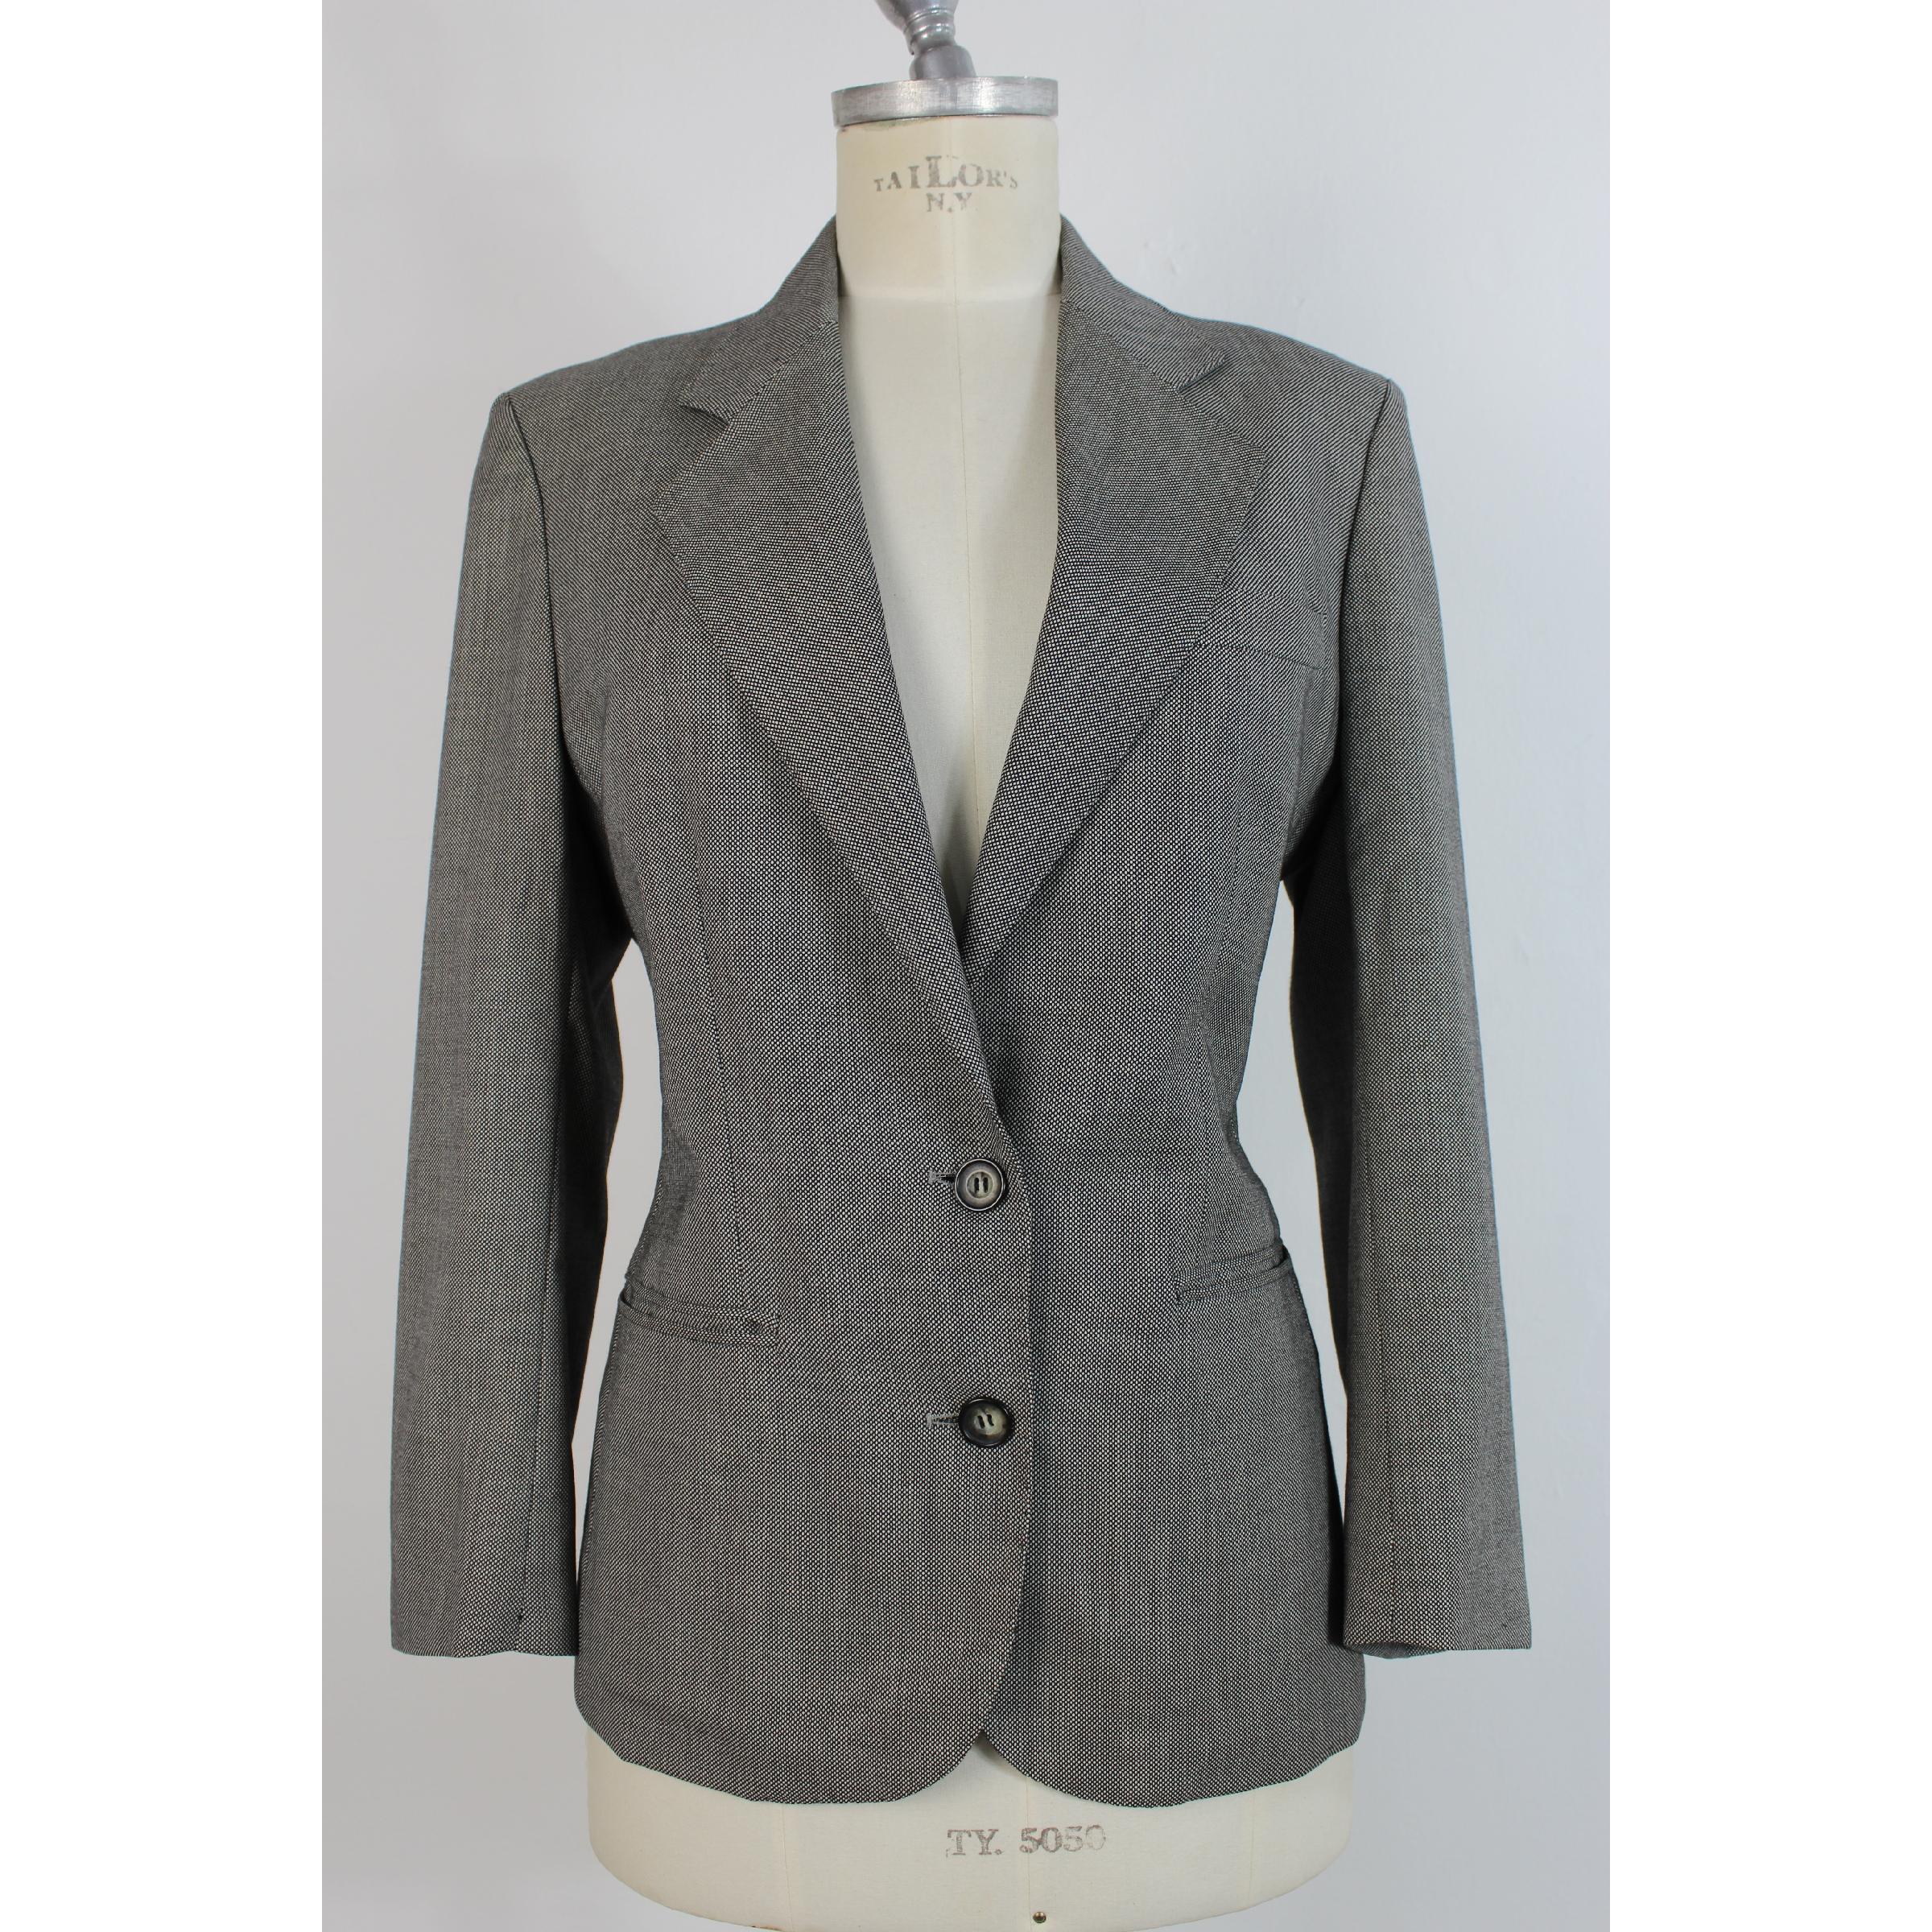 Burberry vintage jacket for women, black and white houndstooth pattern, 100% wool. 1980s. Made in France. Excellent vintage conditions.

Size: 40 It 6 Us 8 Uk

Shoulder: 42 cm
Bust / Chest: 53 cm
Sleeve: 55 cm
Length: 69 cm